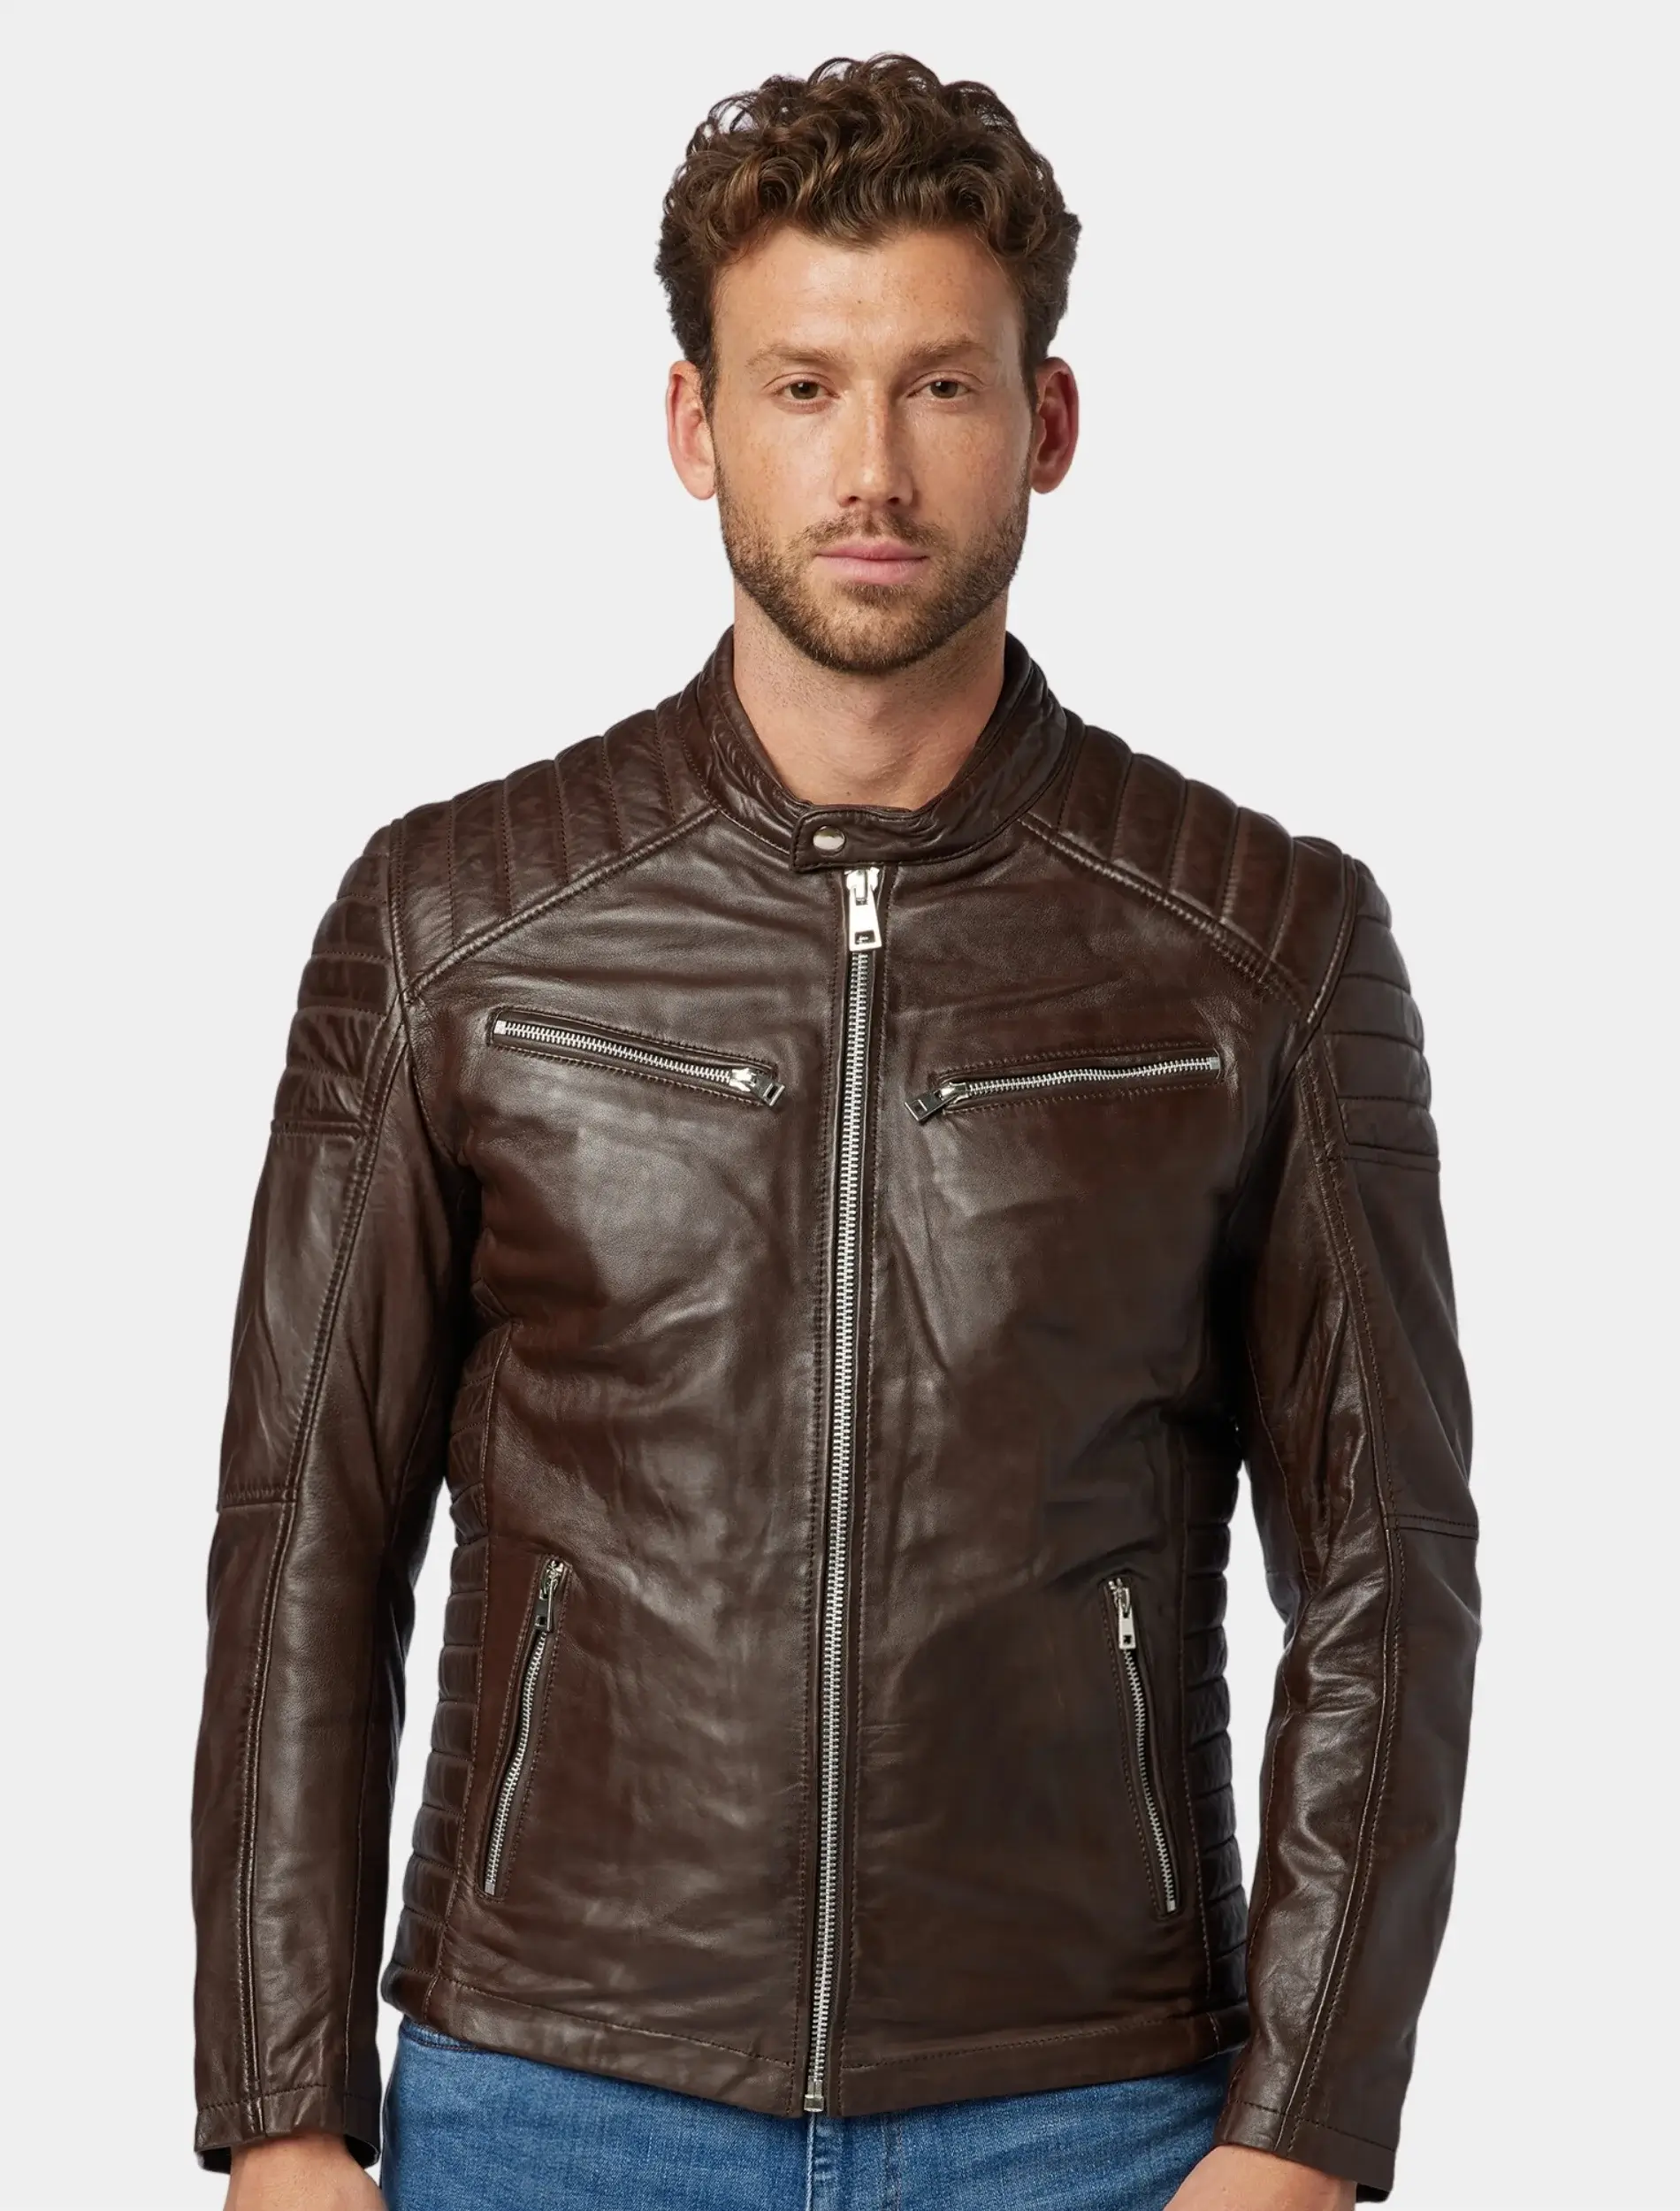 Mens Classic Dark Brown Leather Cafe Racer Jacket